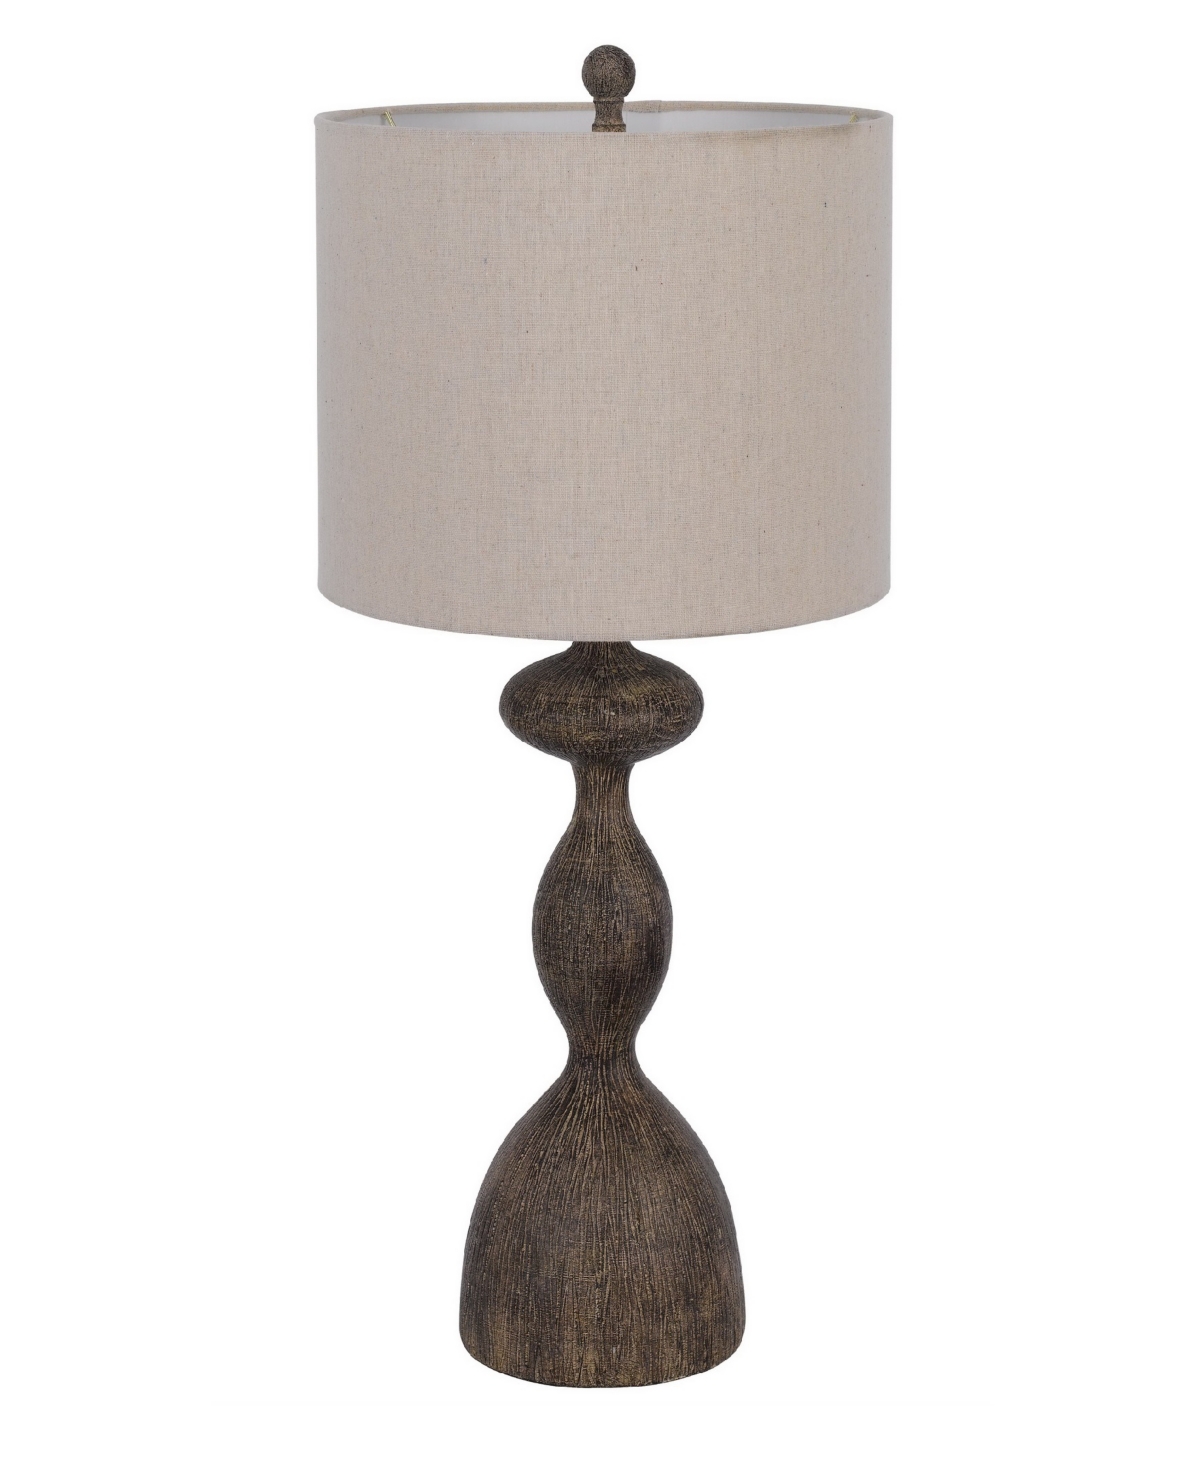 Shop Cal Lighting 29.5" Height Finish Resin Table Lamp Set In Distressed Wood